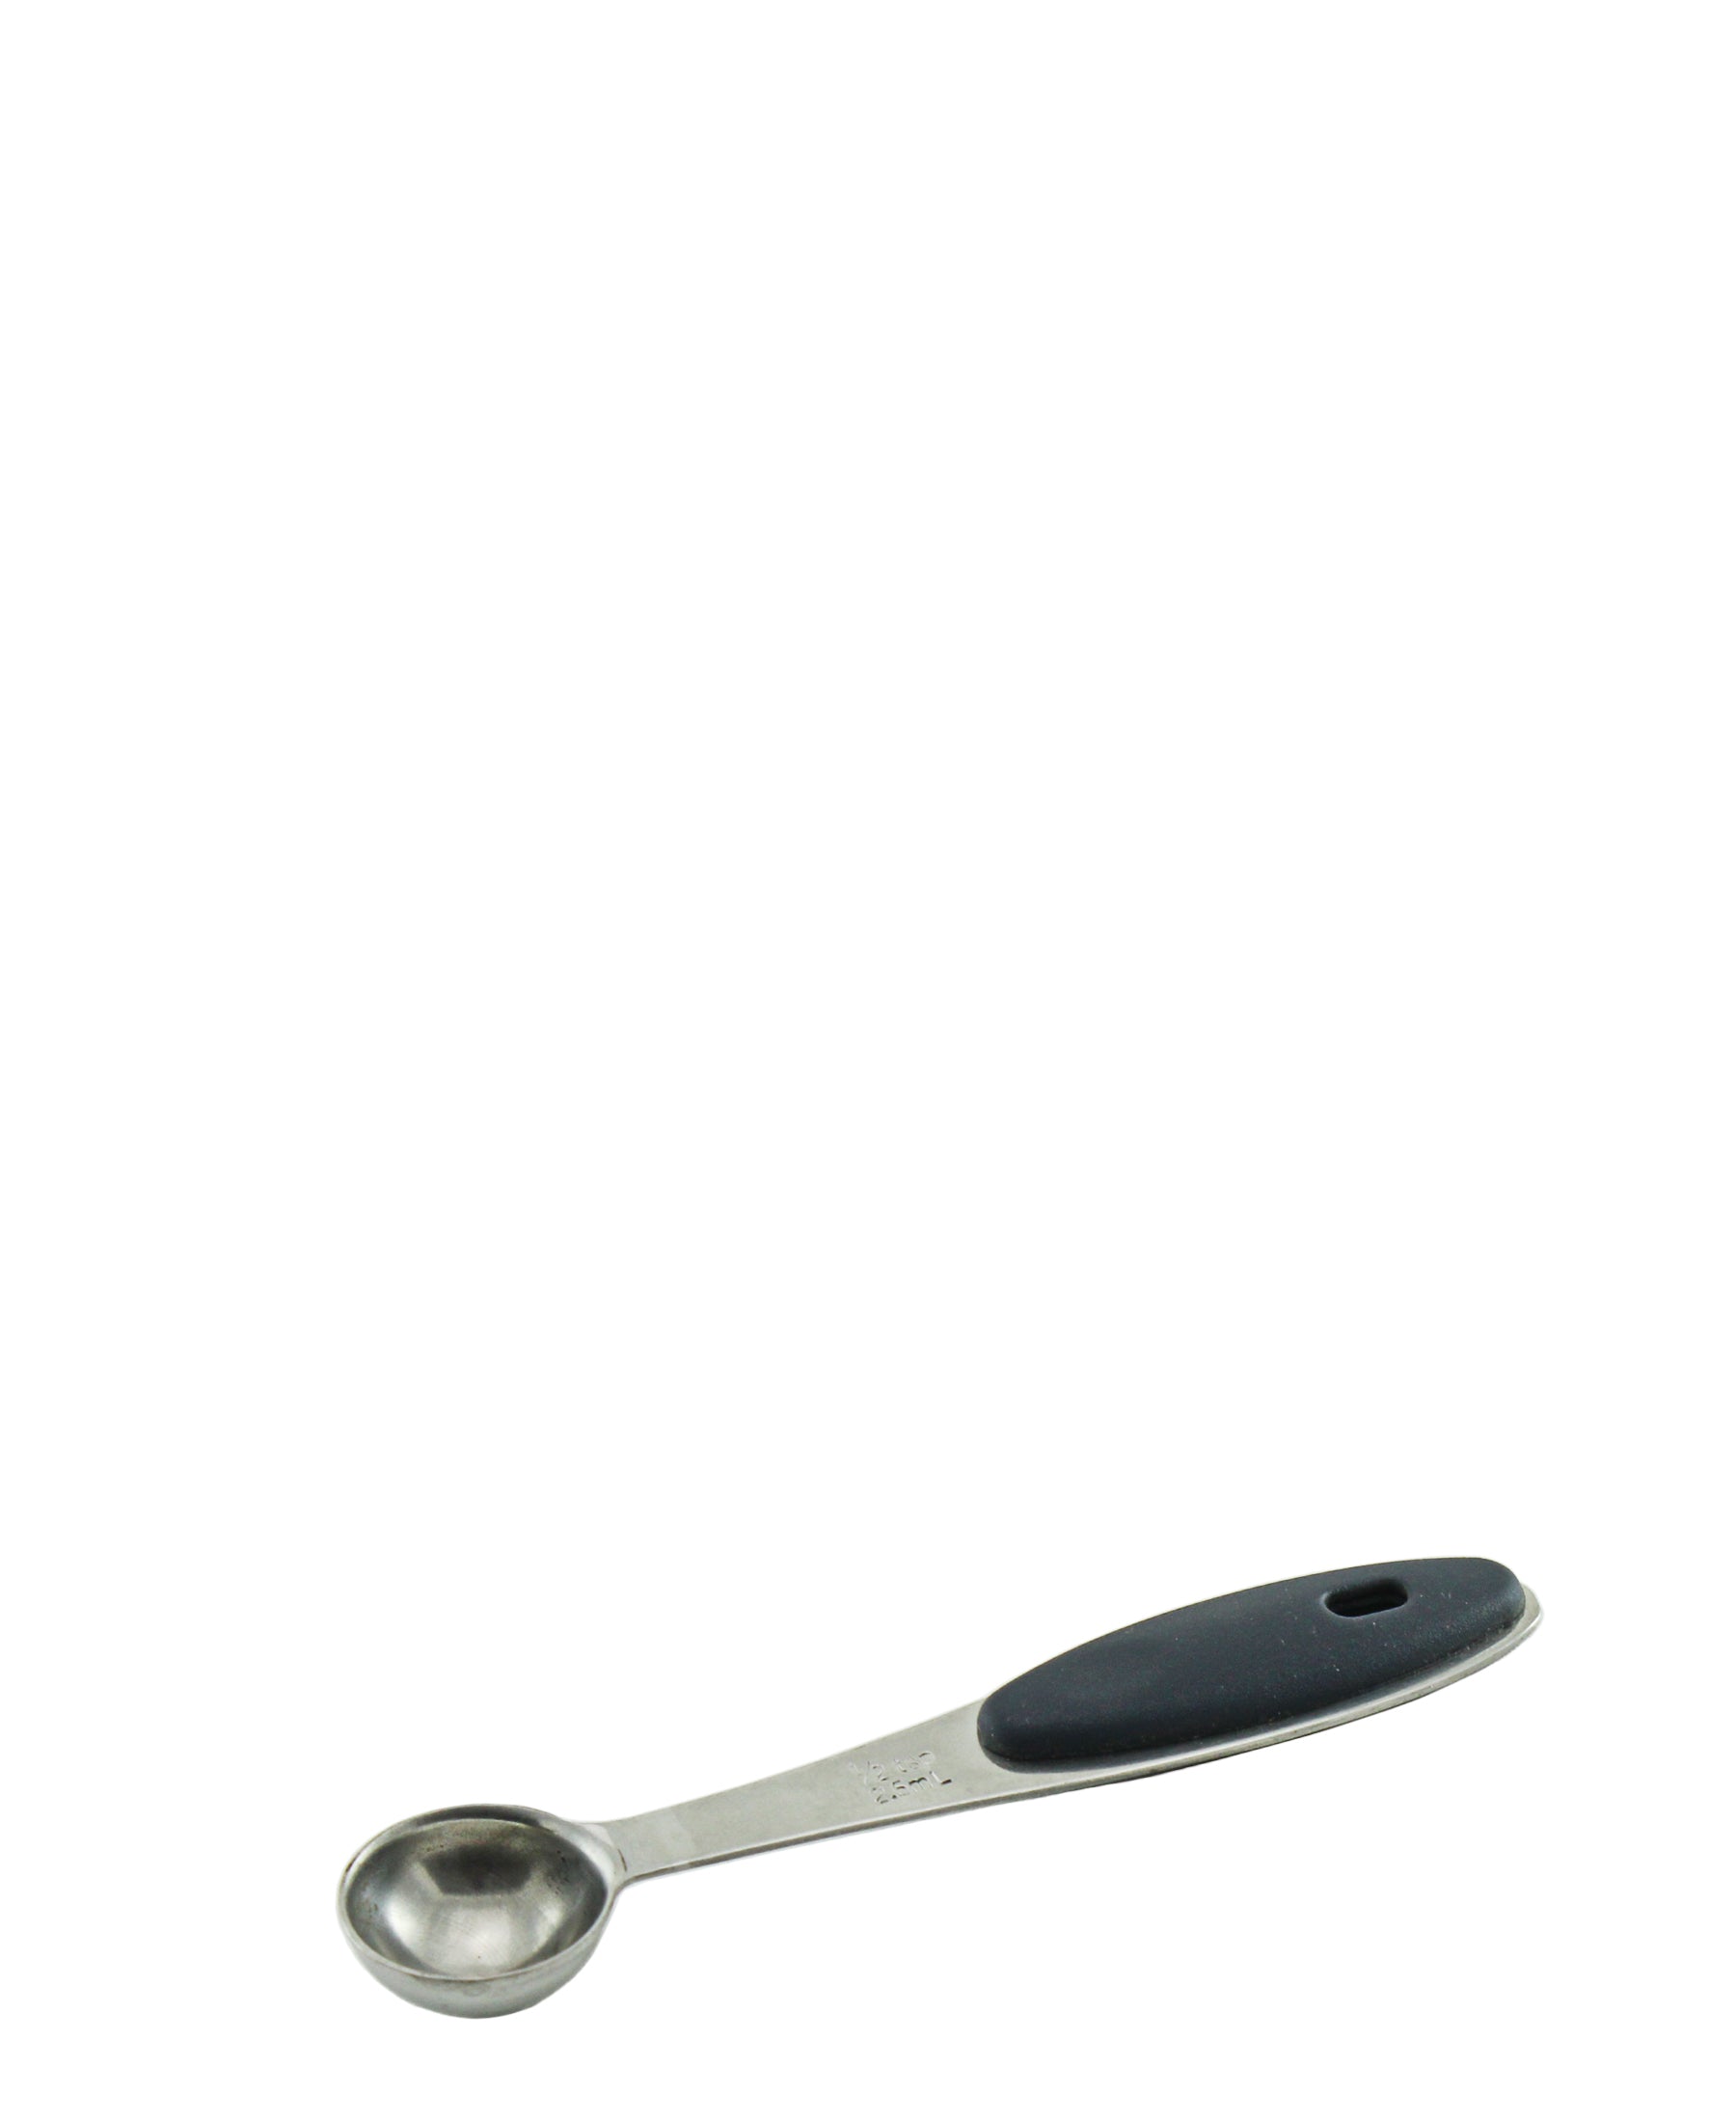 Legend Set of 4 Stainless Measuring Spoon - Silver & Black